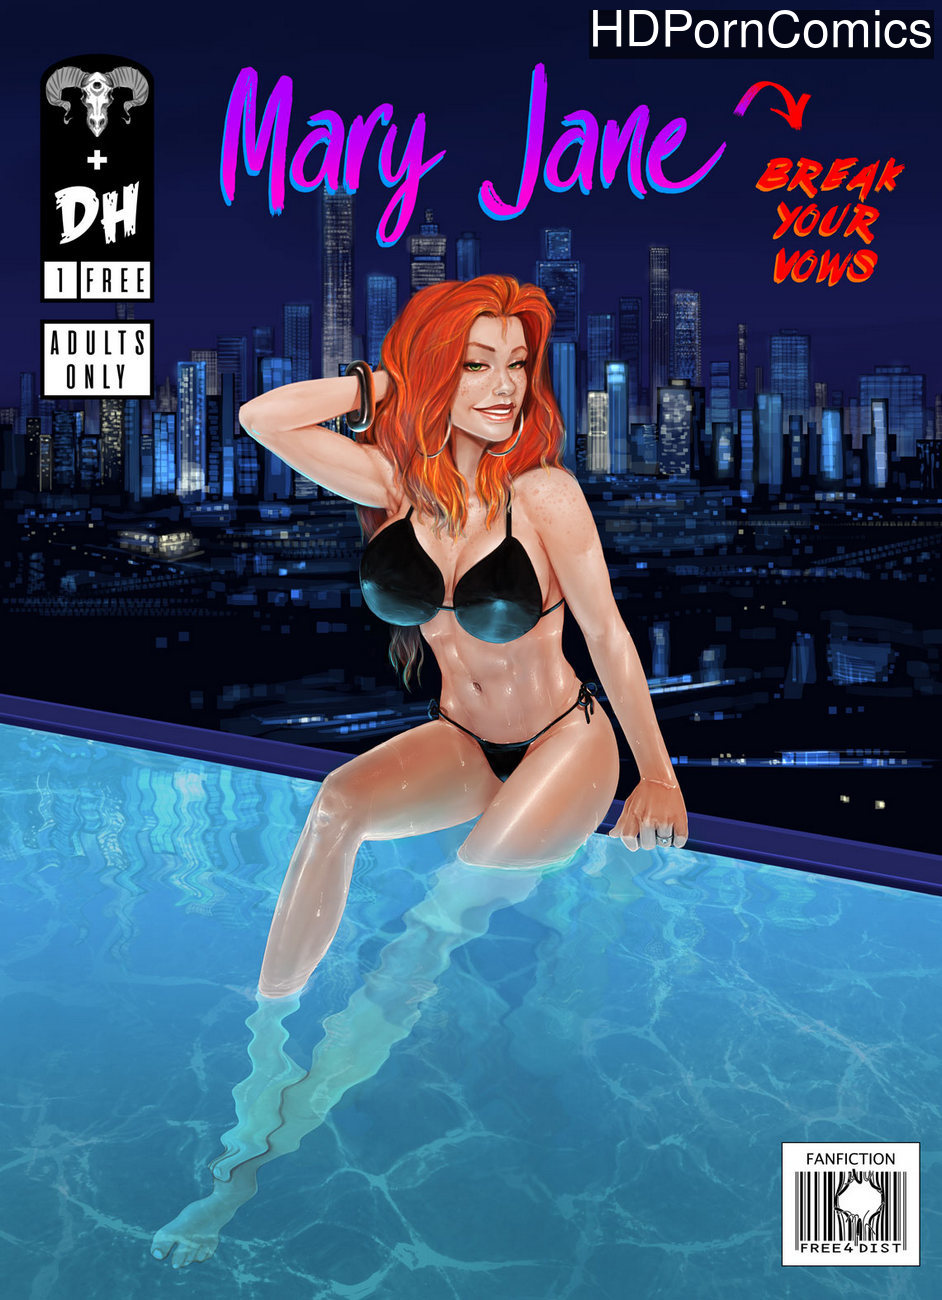 Sexy Voes - Mary Jane - Break Your Vows comic porn - HD Porn Comics